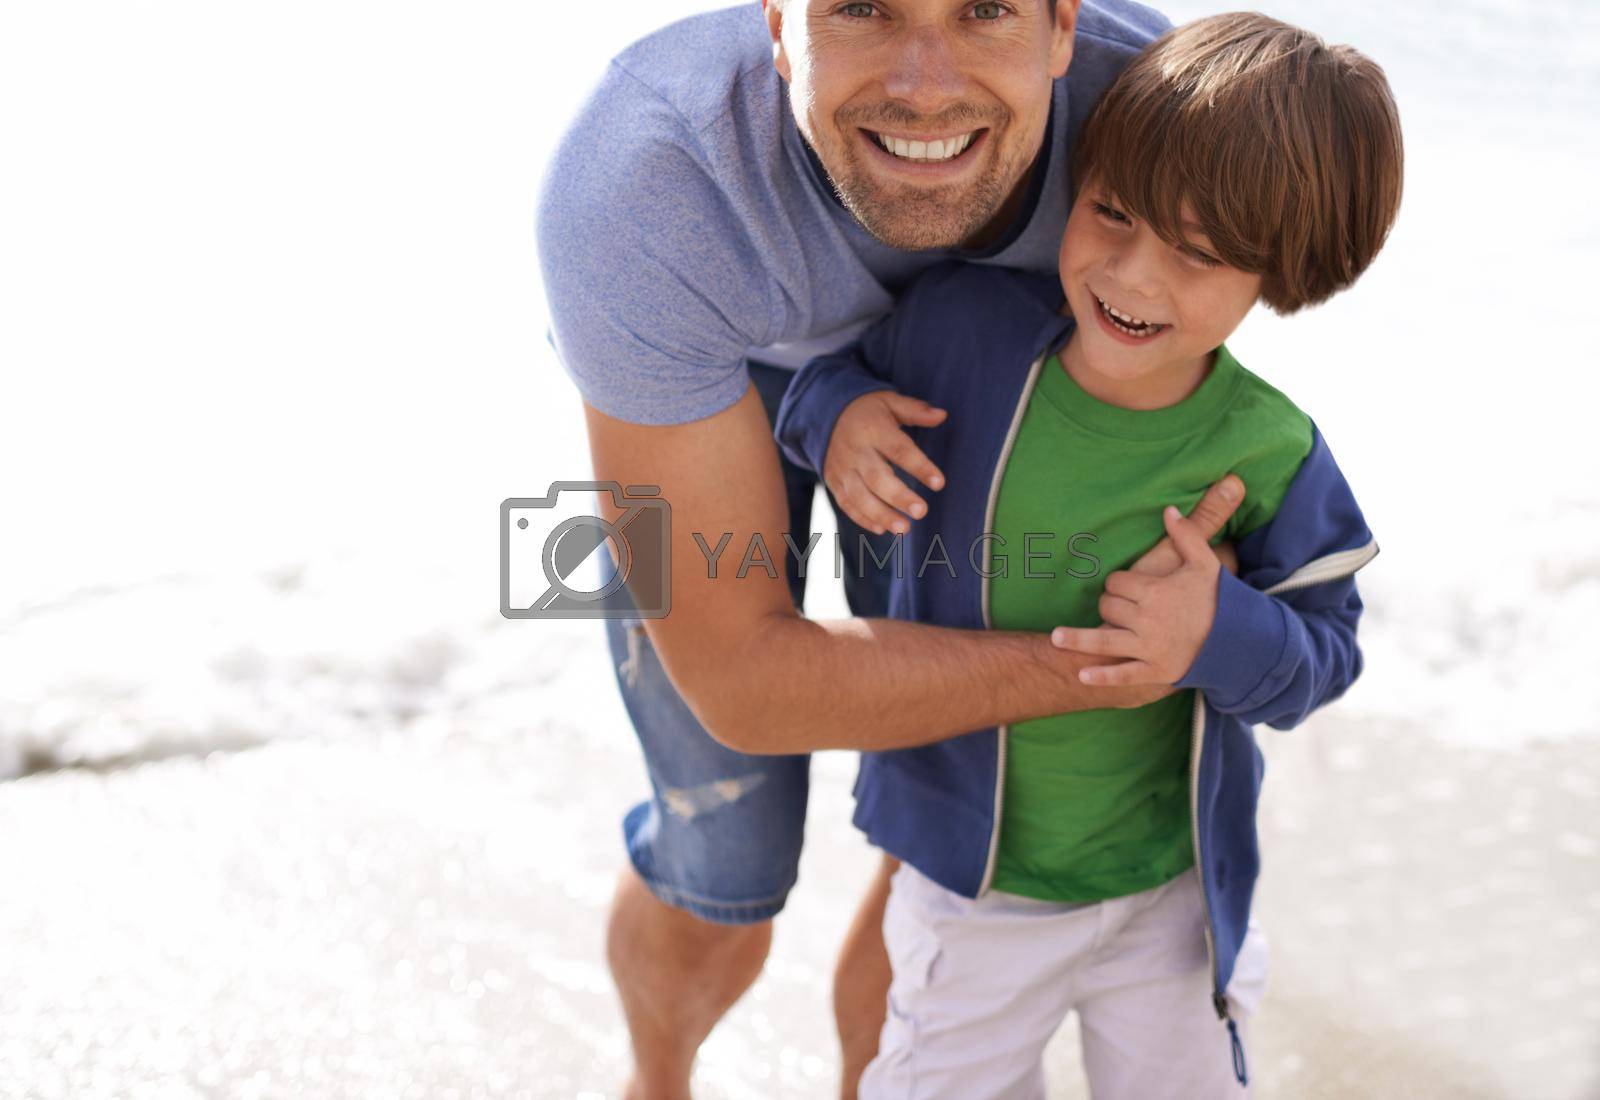 Father and son bonding time. A father playing with his son at the beach